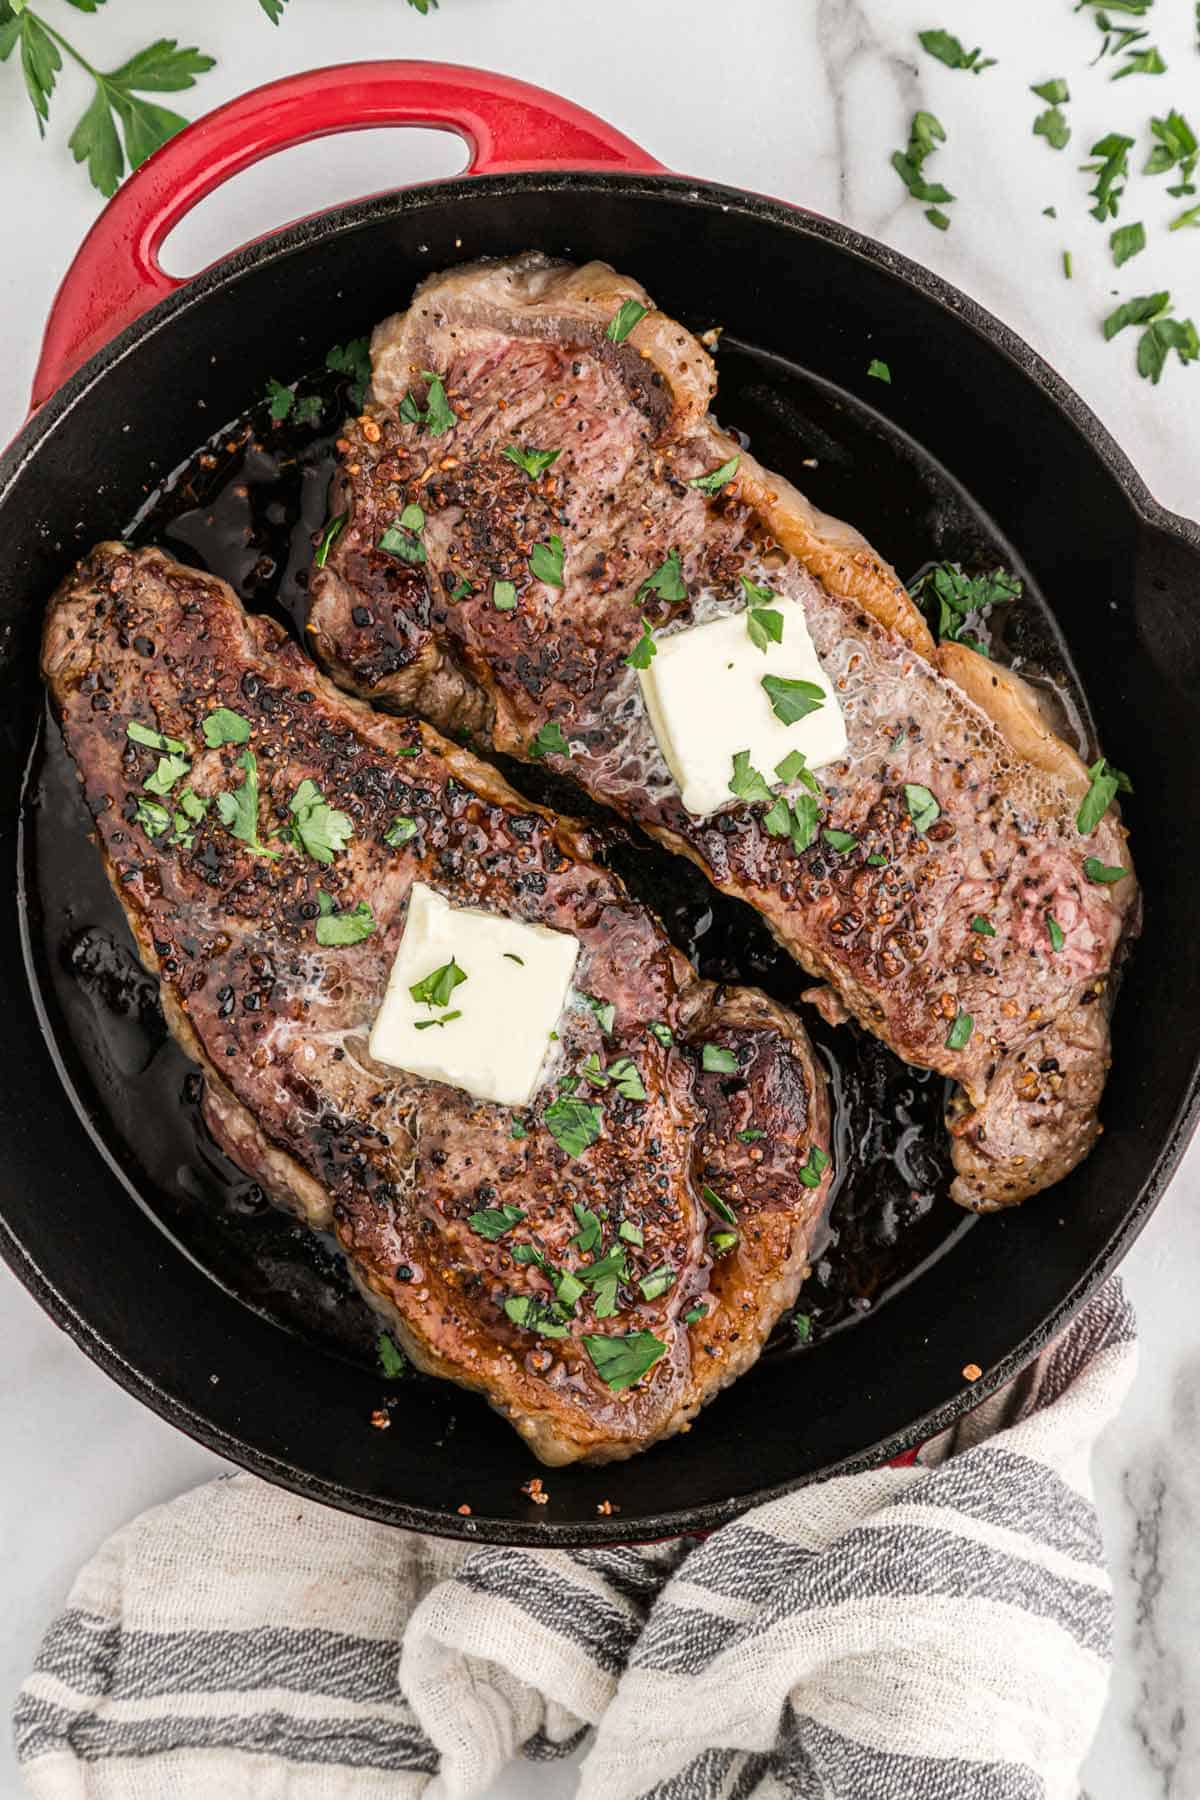 Cooked steaks in a pan topped with pats of butter.